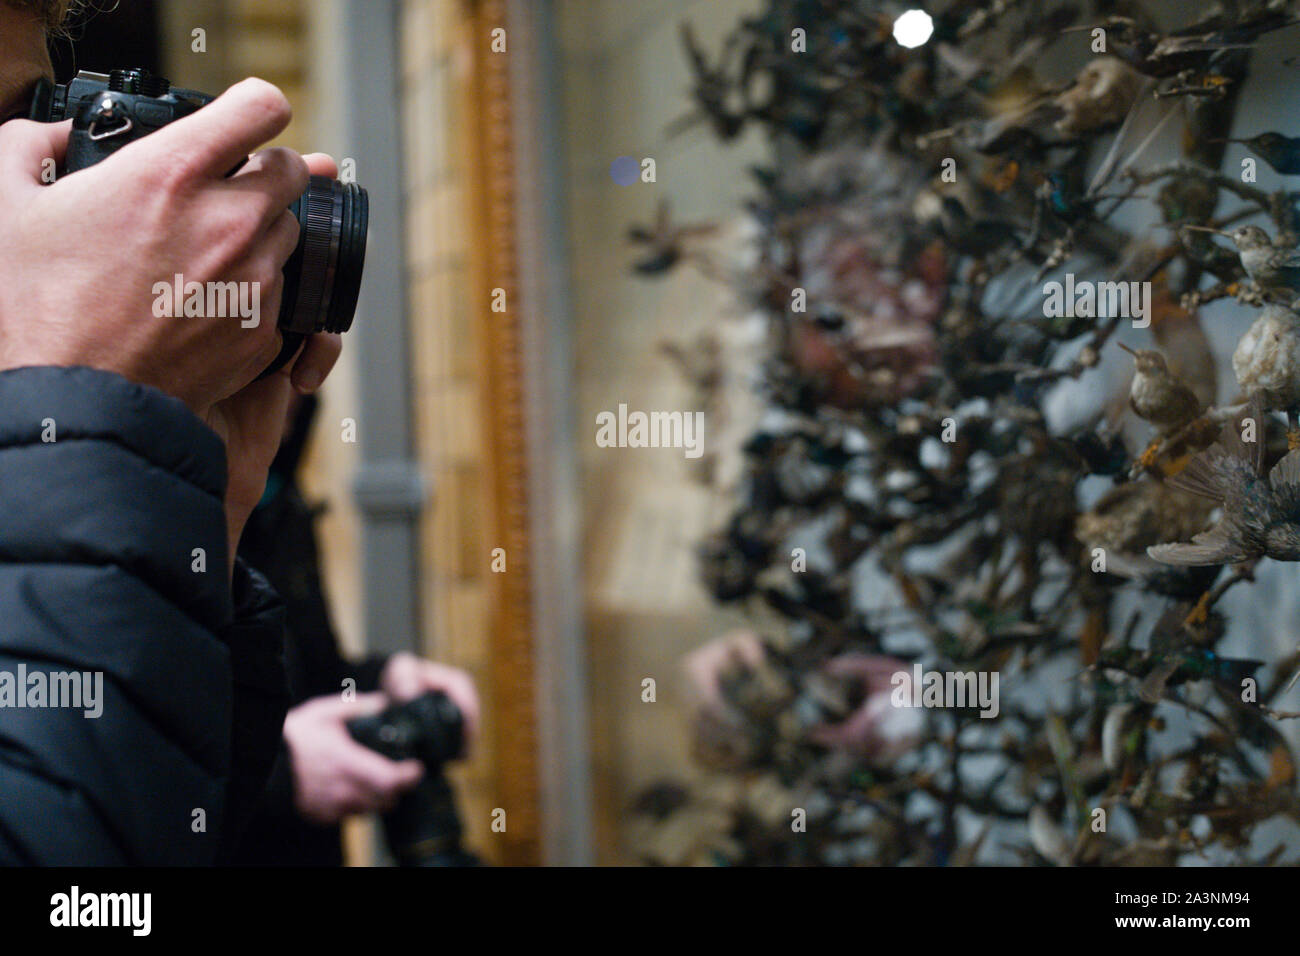 Taking photos of the museum display, Museum of natural history London, UK Stock Photo